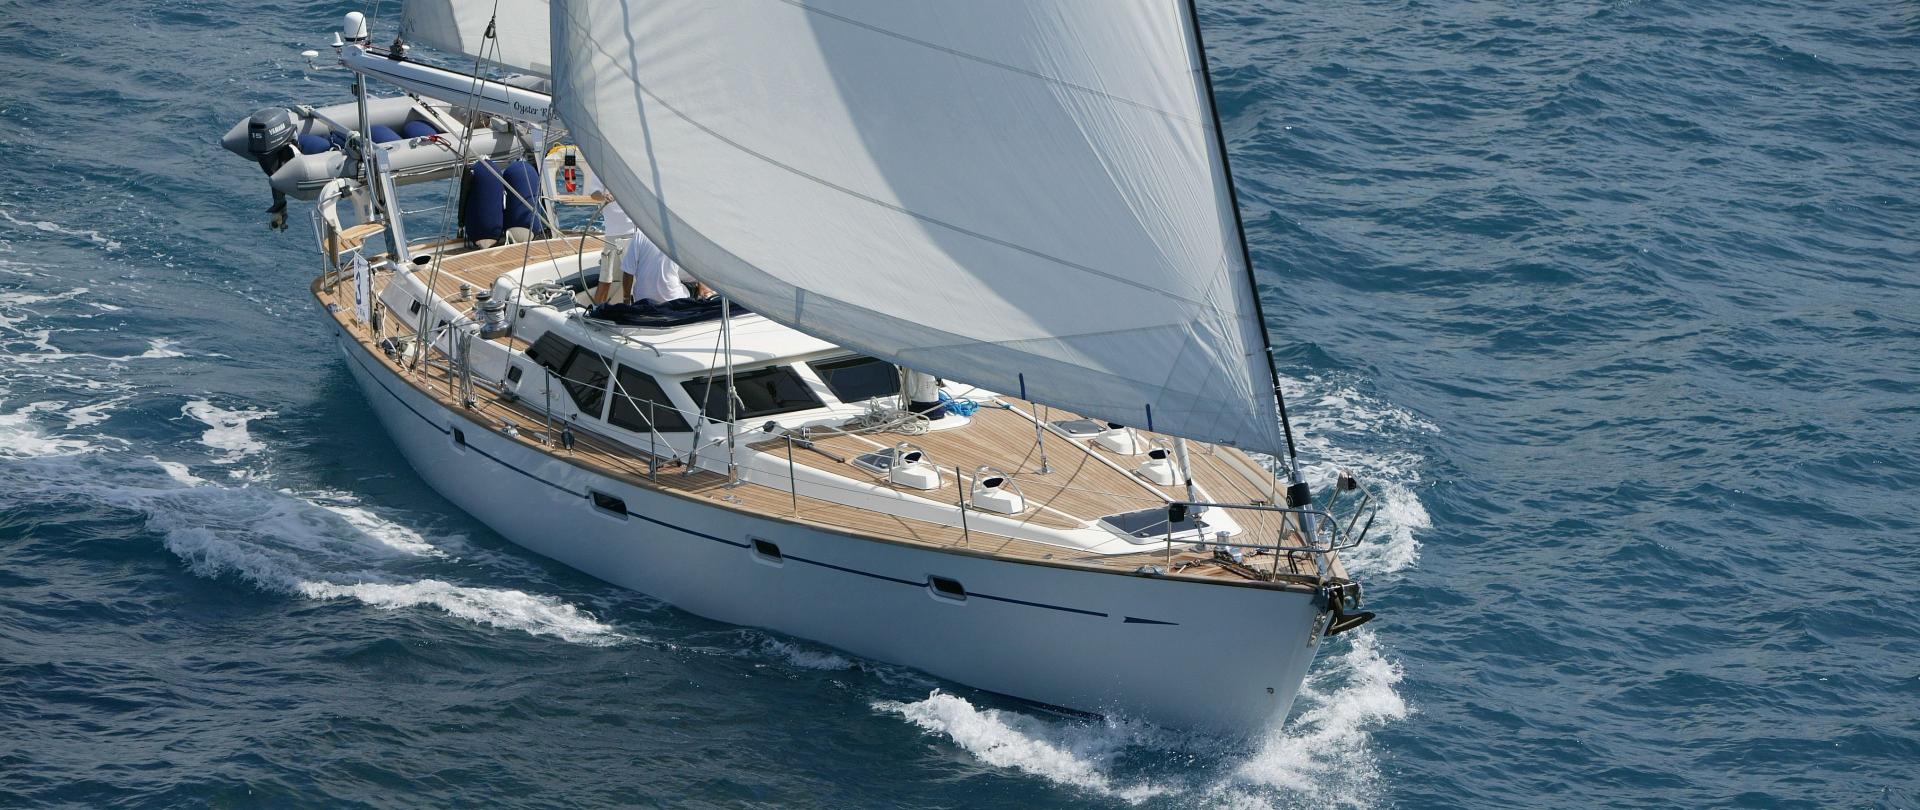 56' oyster sailboat